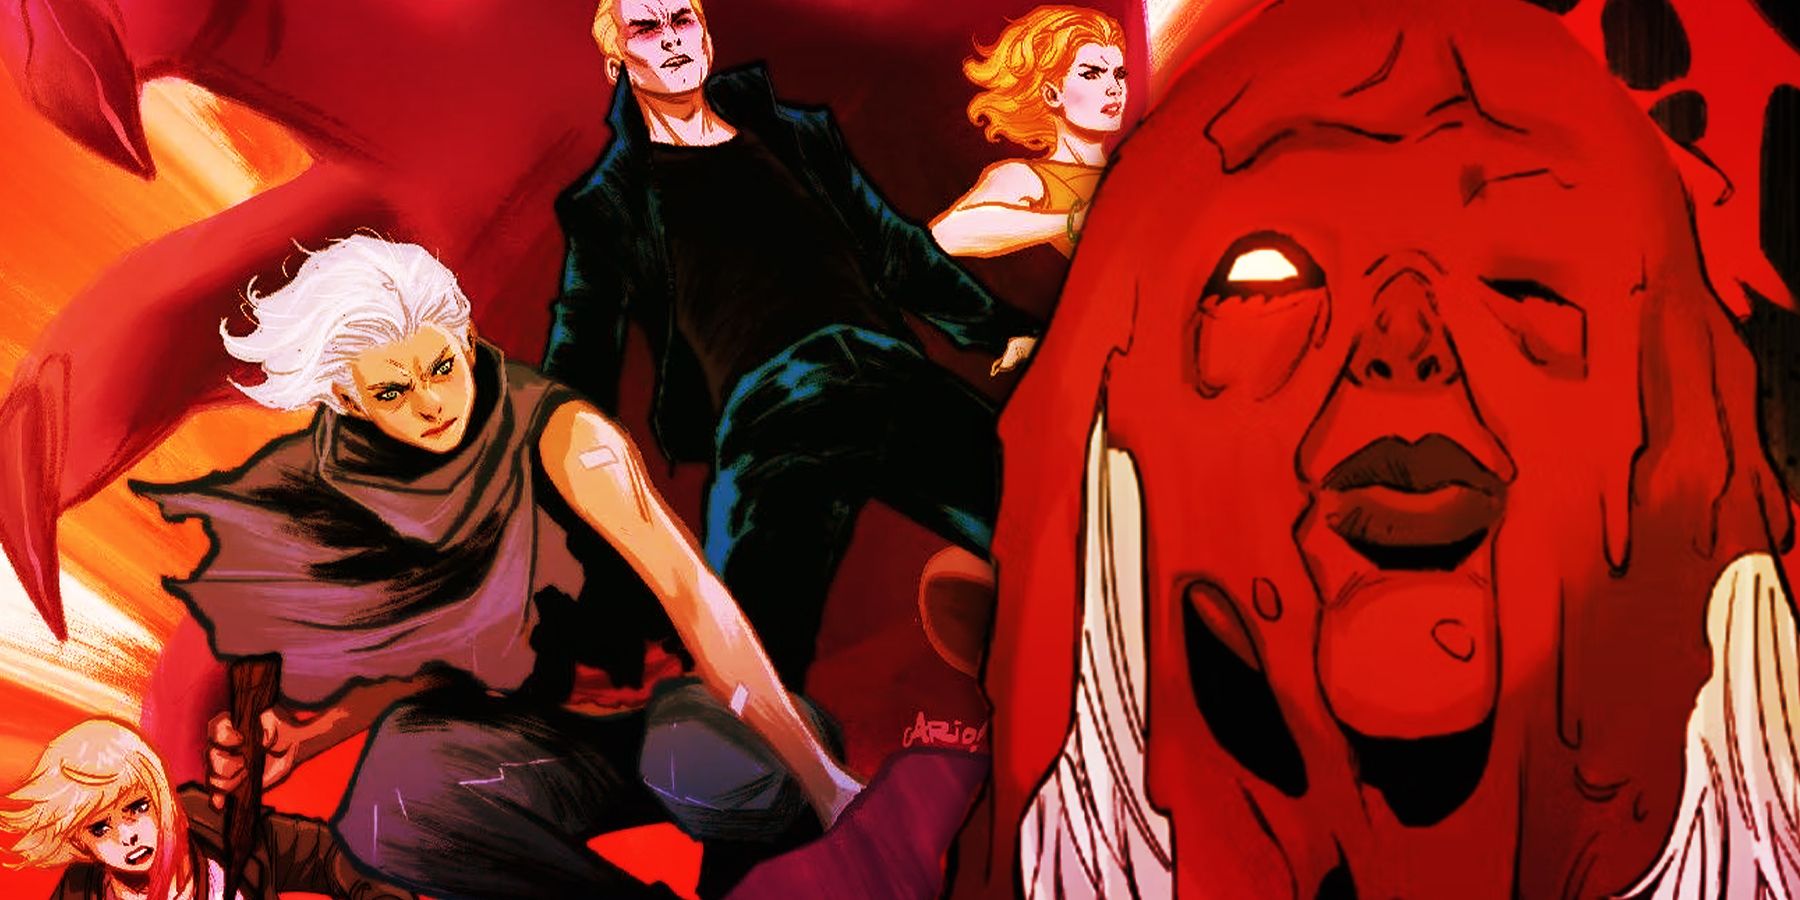 An Iconic Buffy the Vampire Character is Back - With a God-Level Power Upgrade